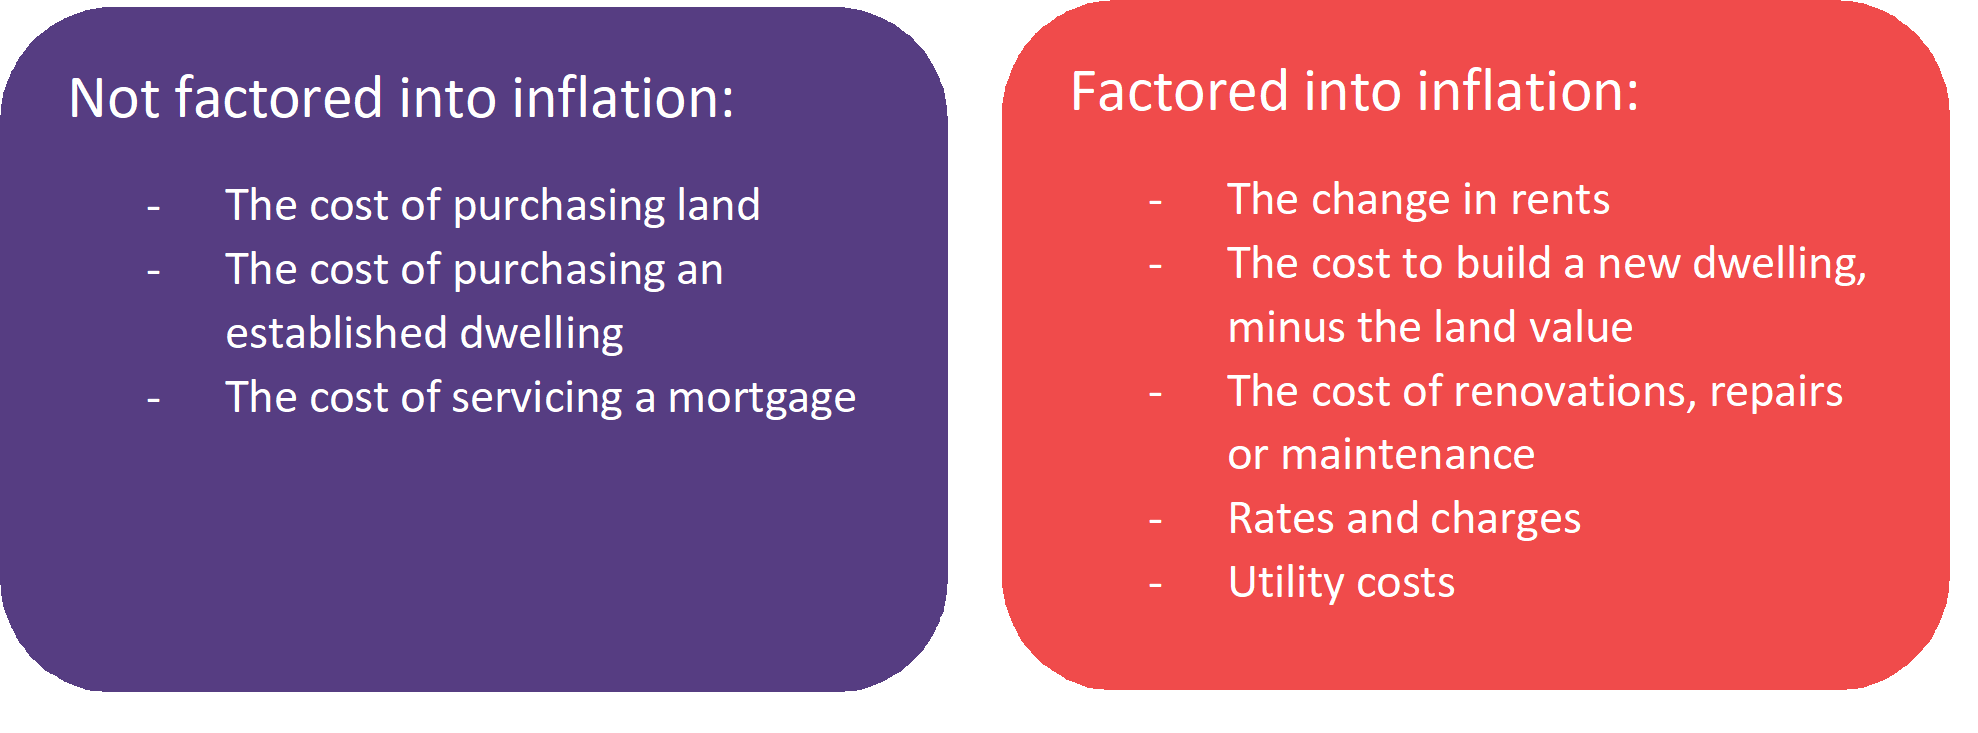 How is housing factored into inflation